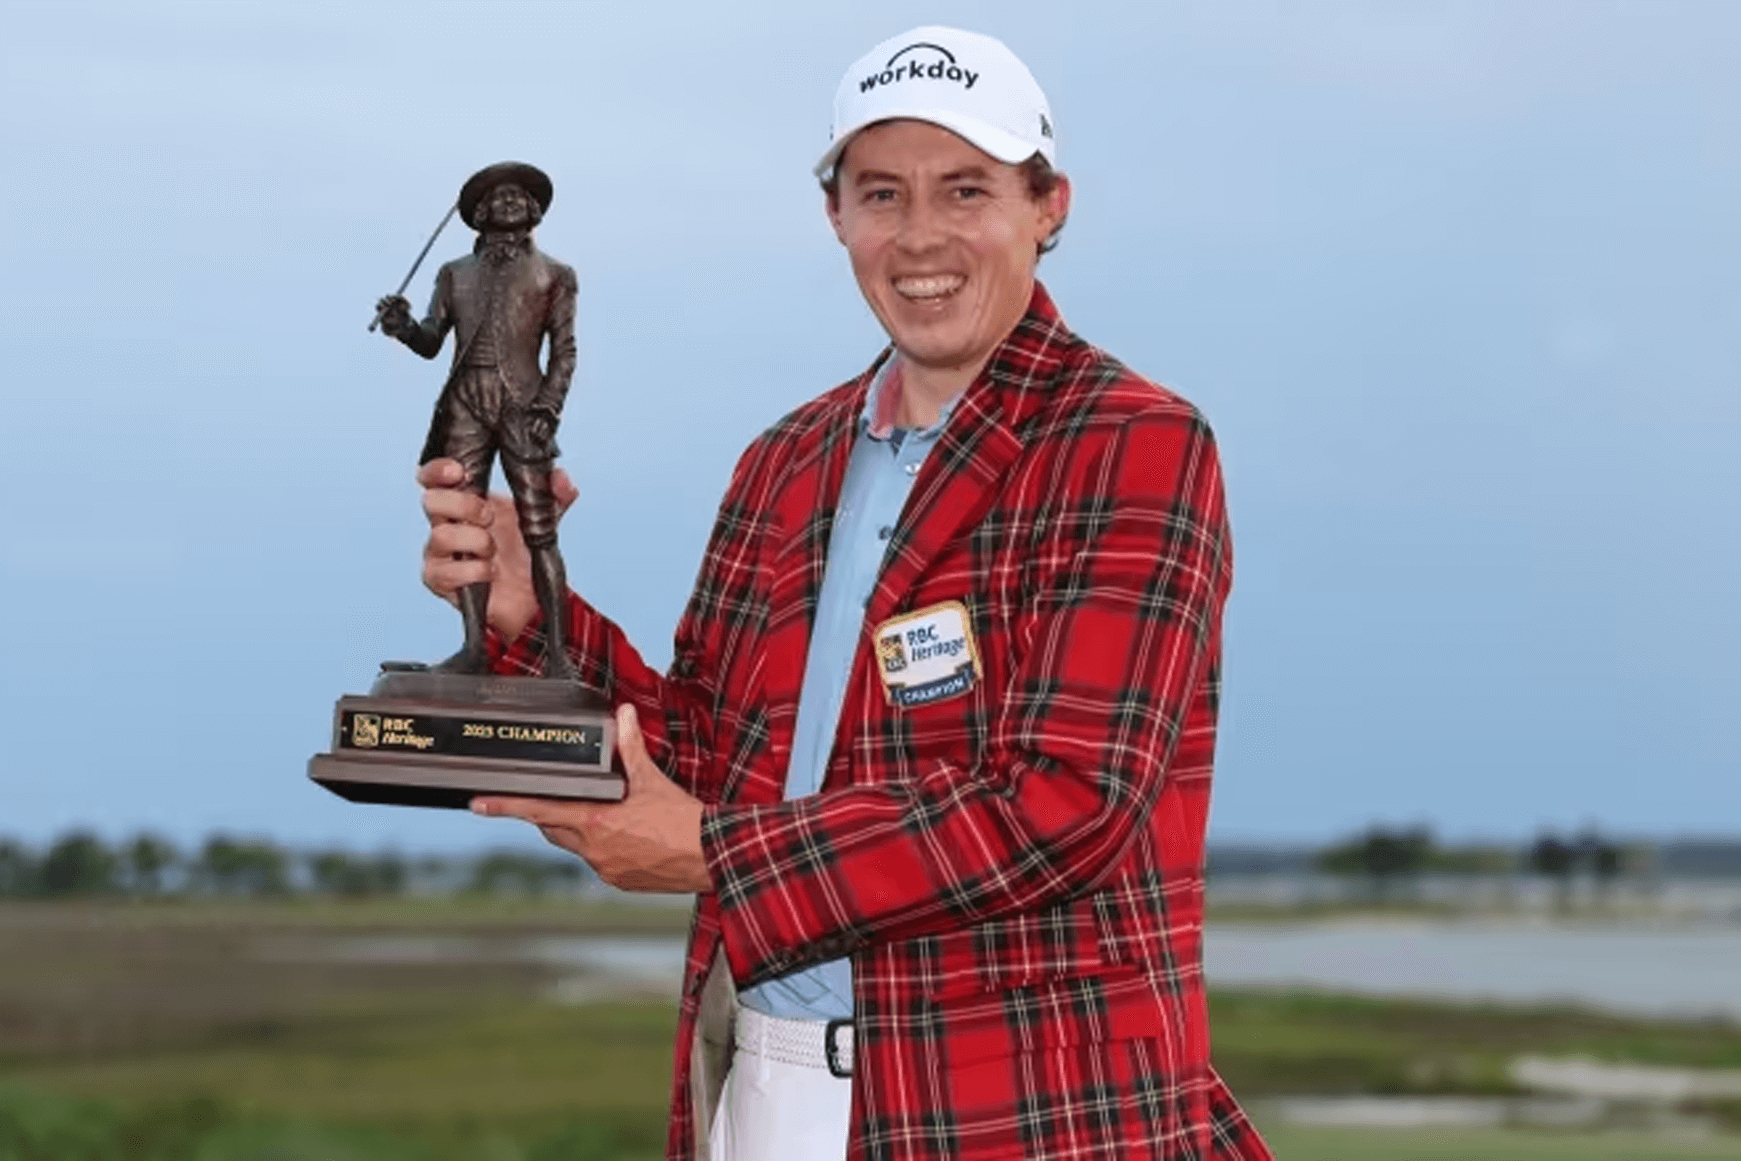 Matt-Fitzpatrick-celebrating-with-a-trophy-at-the-RBC-Heritage